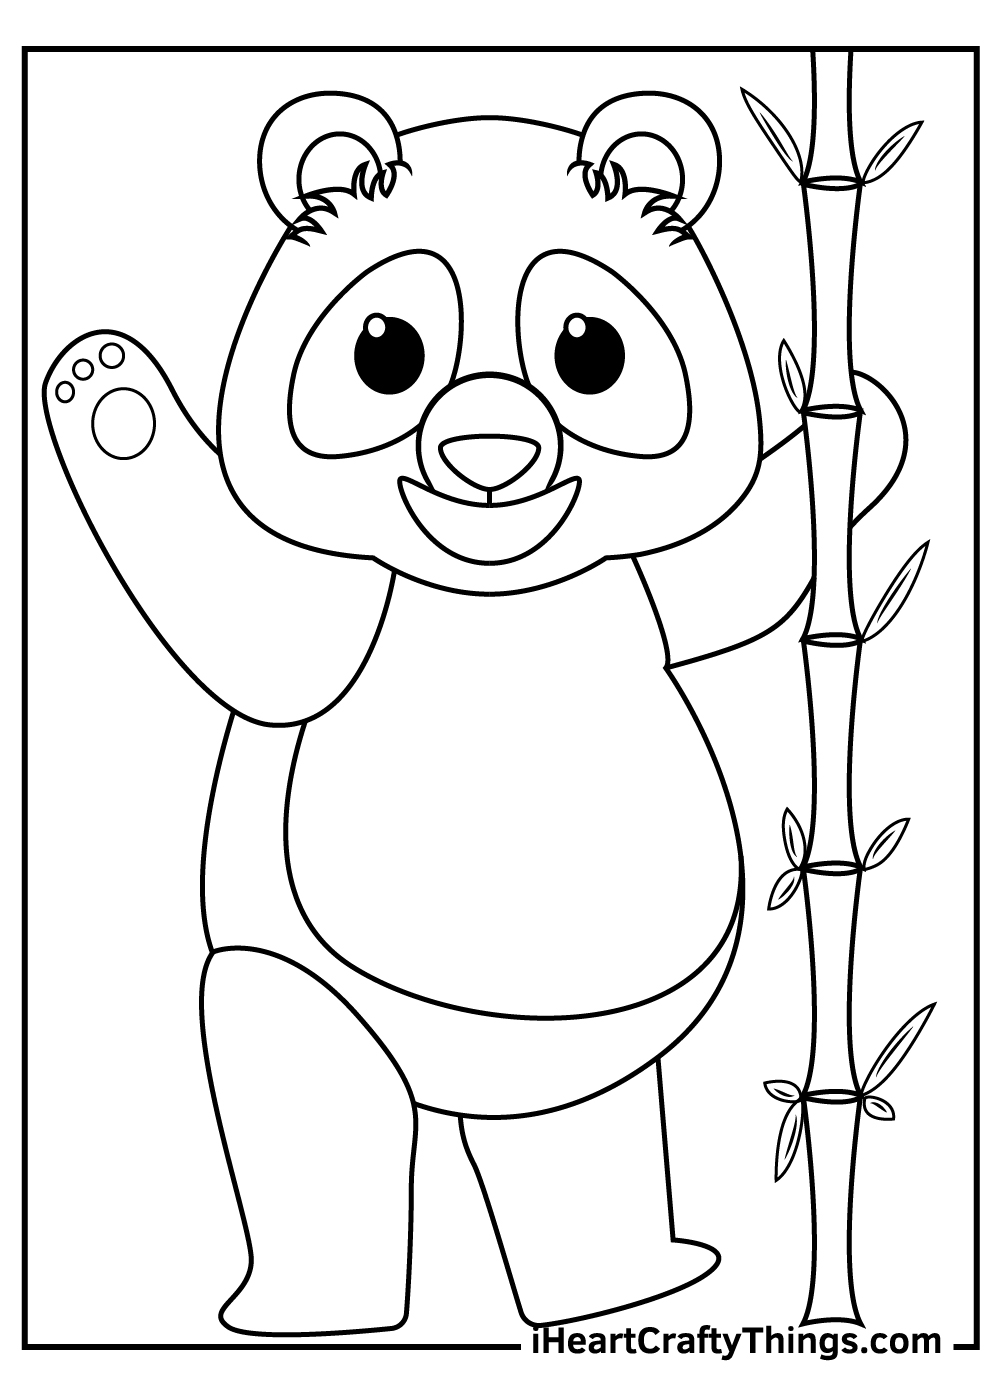 Giant panda coloring pages updated